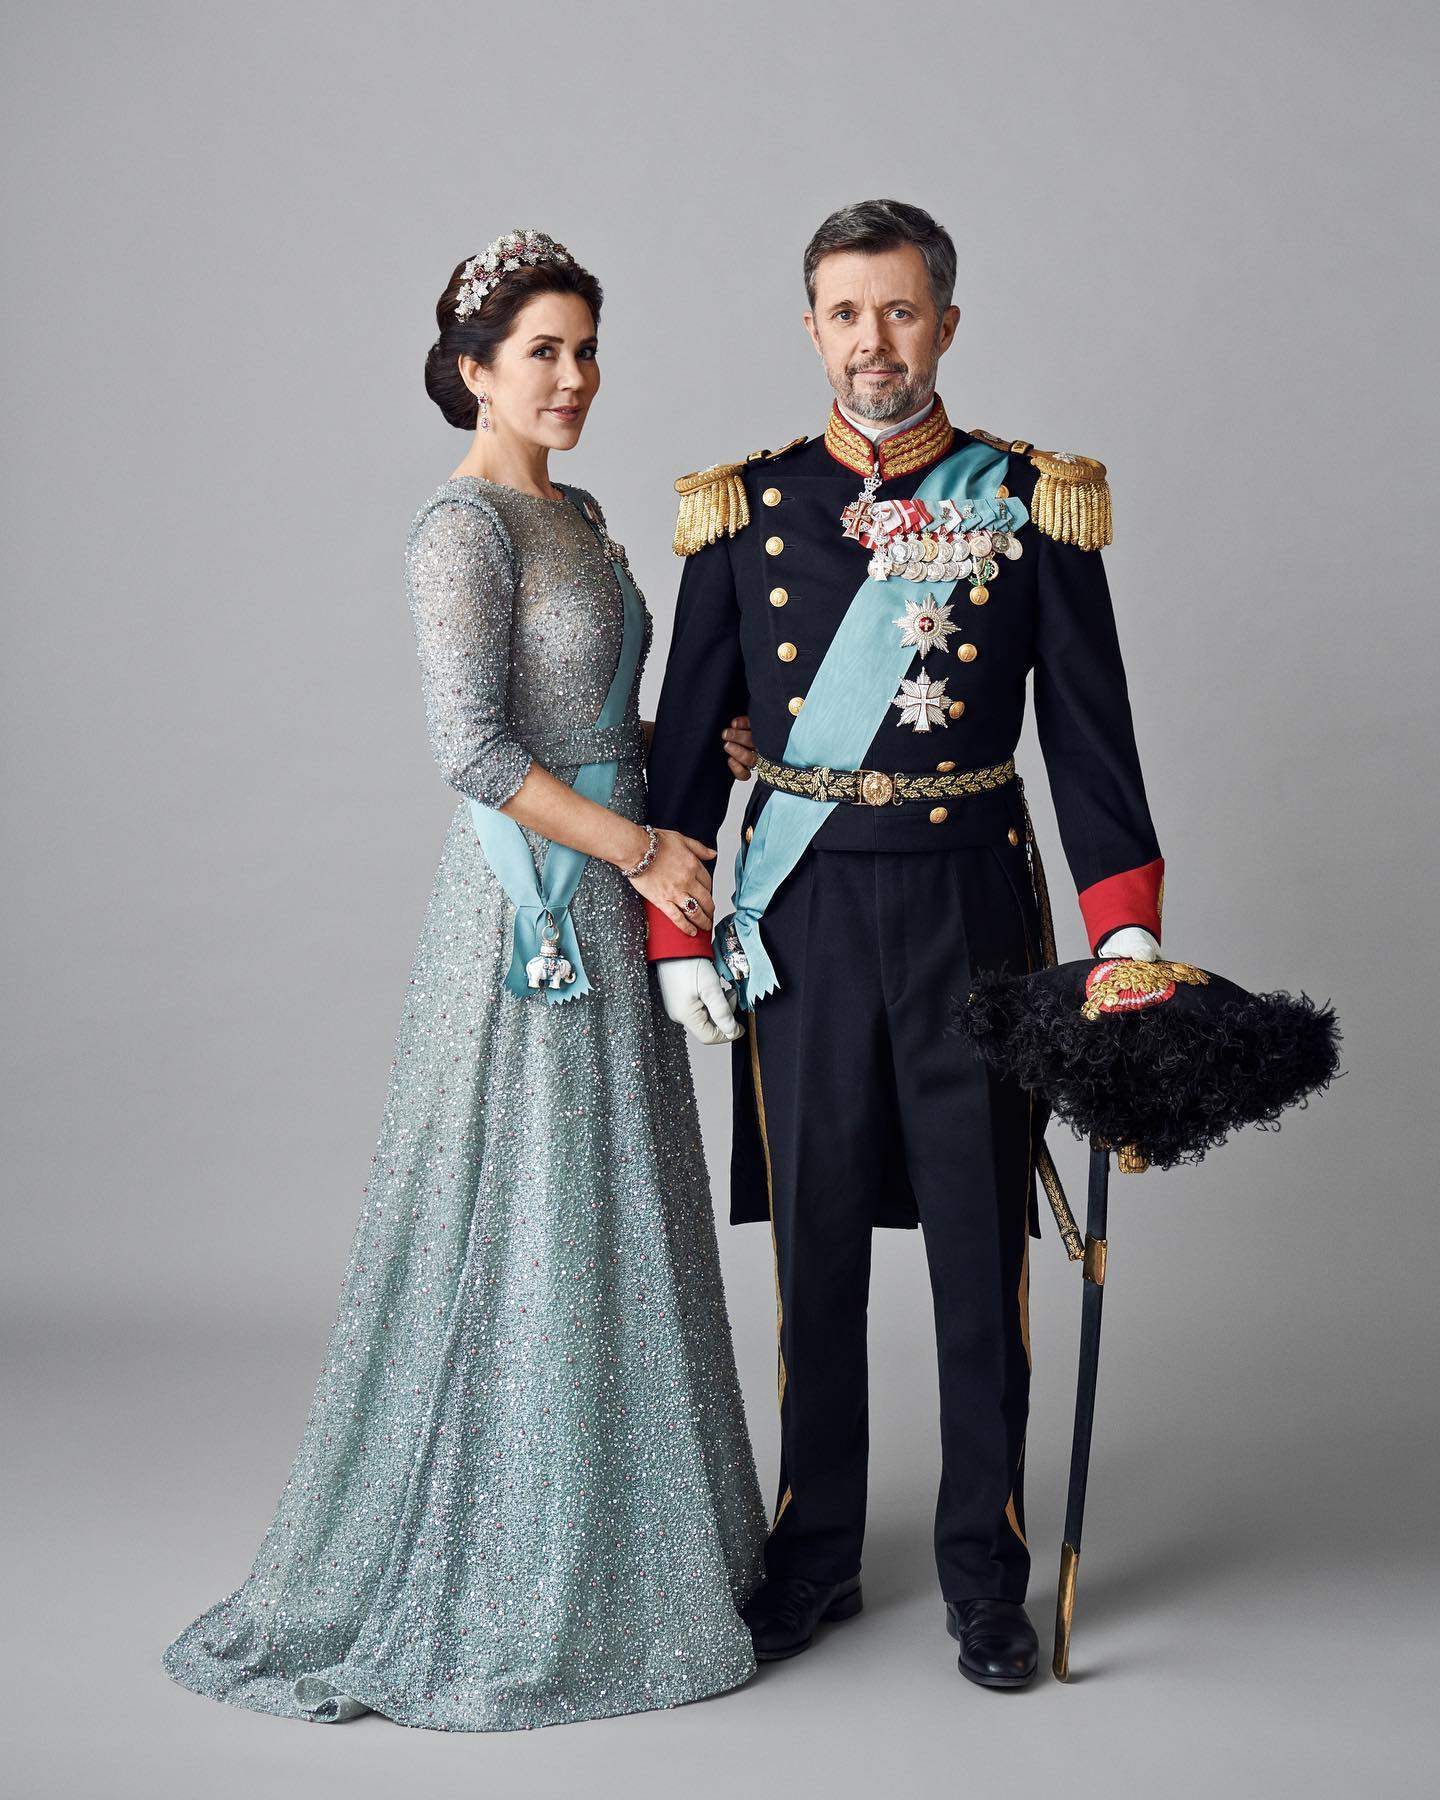 Denmark’s Crown Prince Frederik and Princess Mary, who will become king and queen. Photo: Instagram / @detdanskekongehus